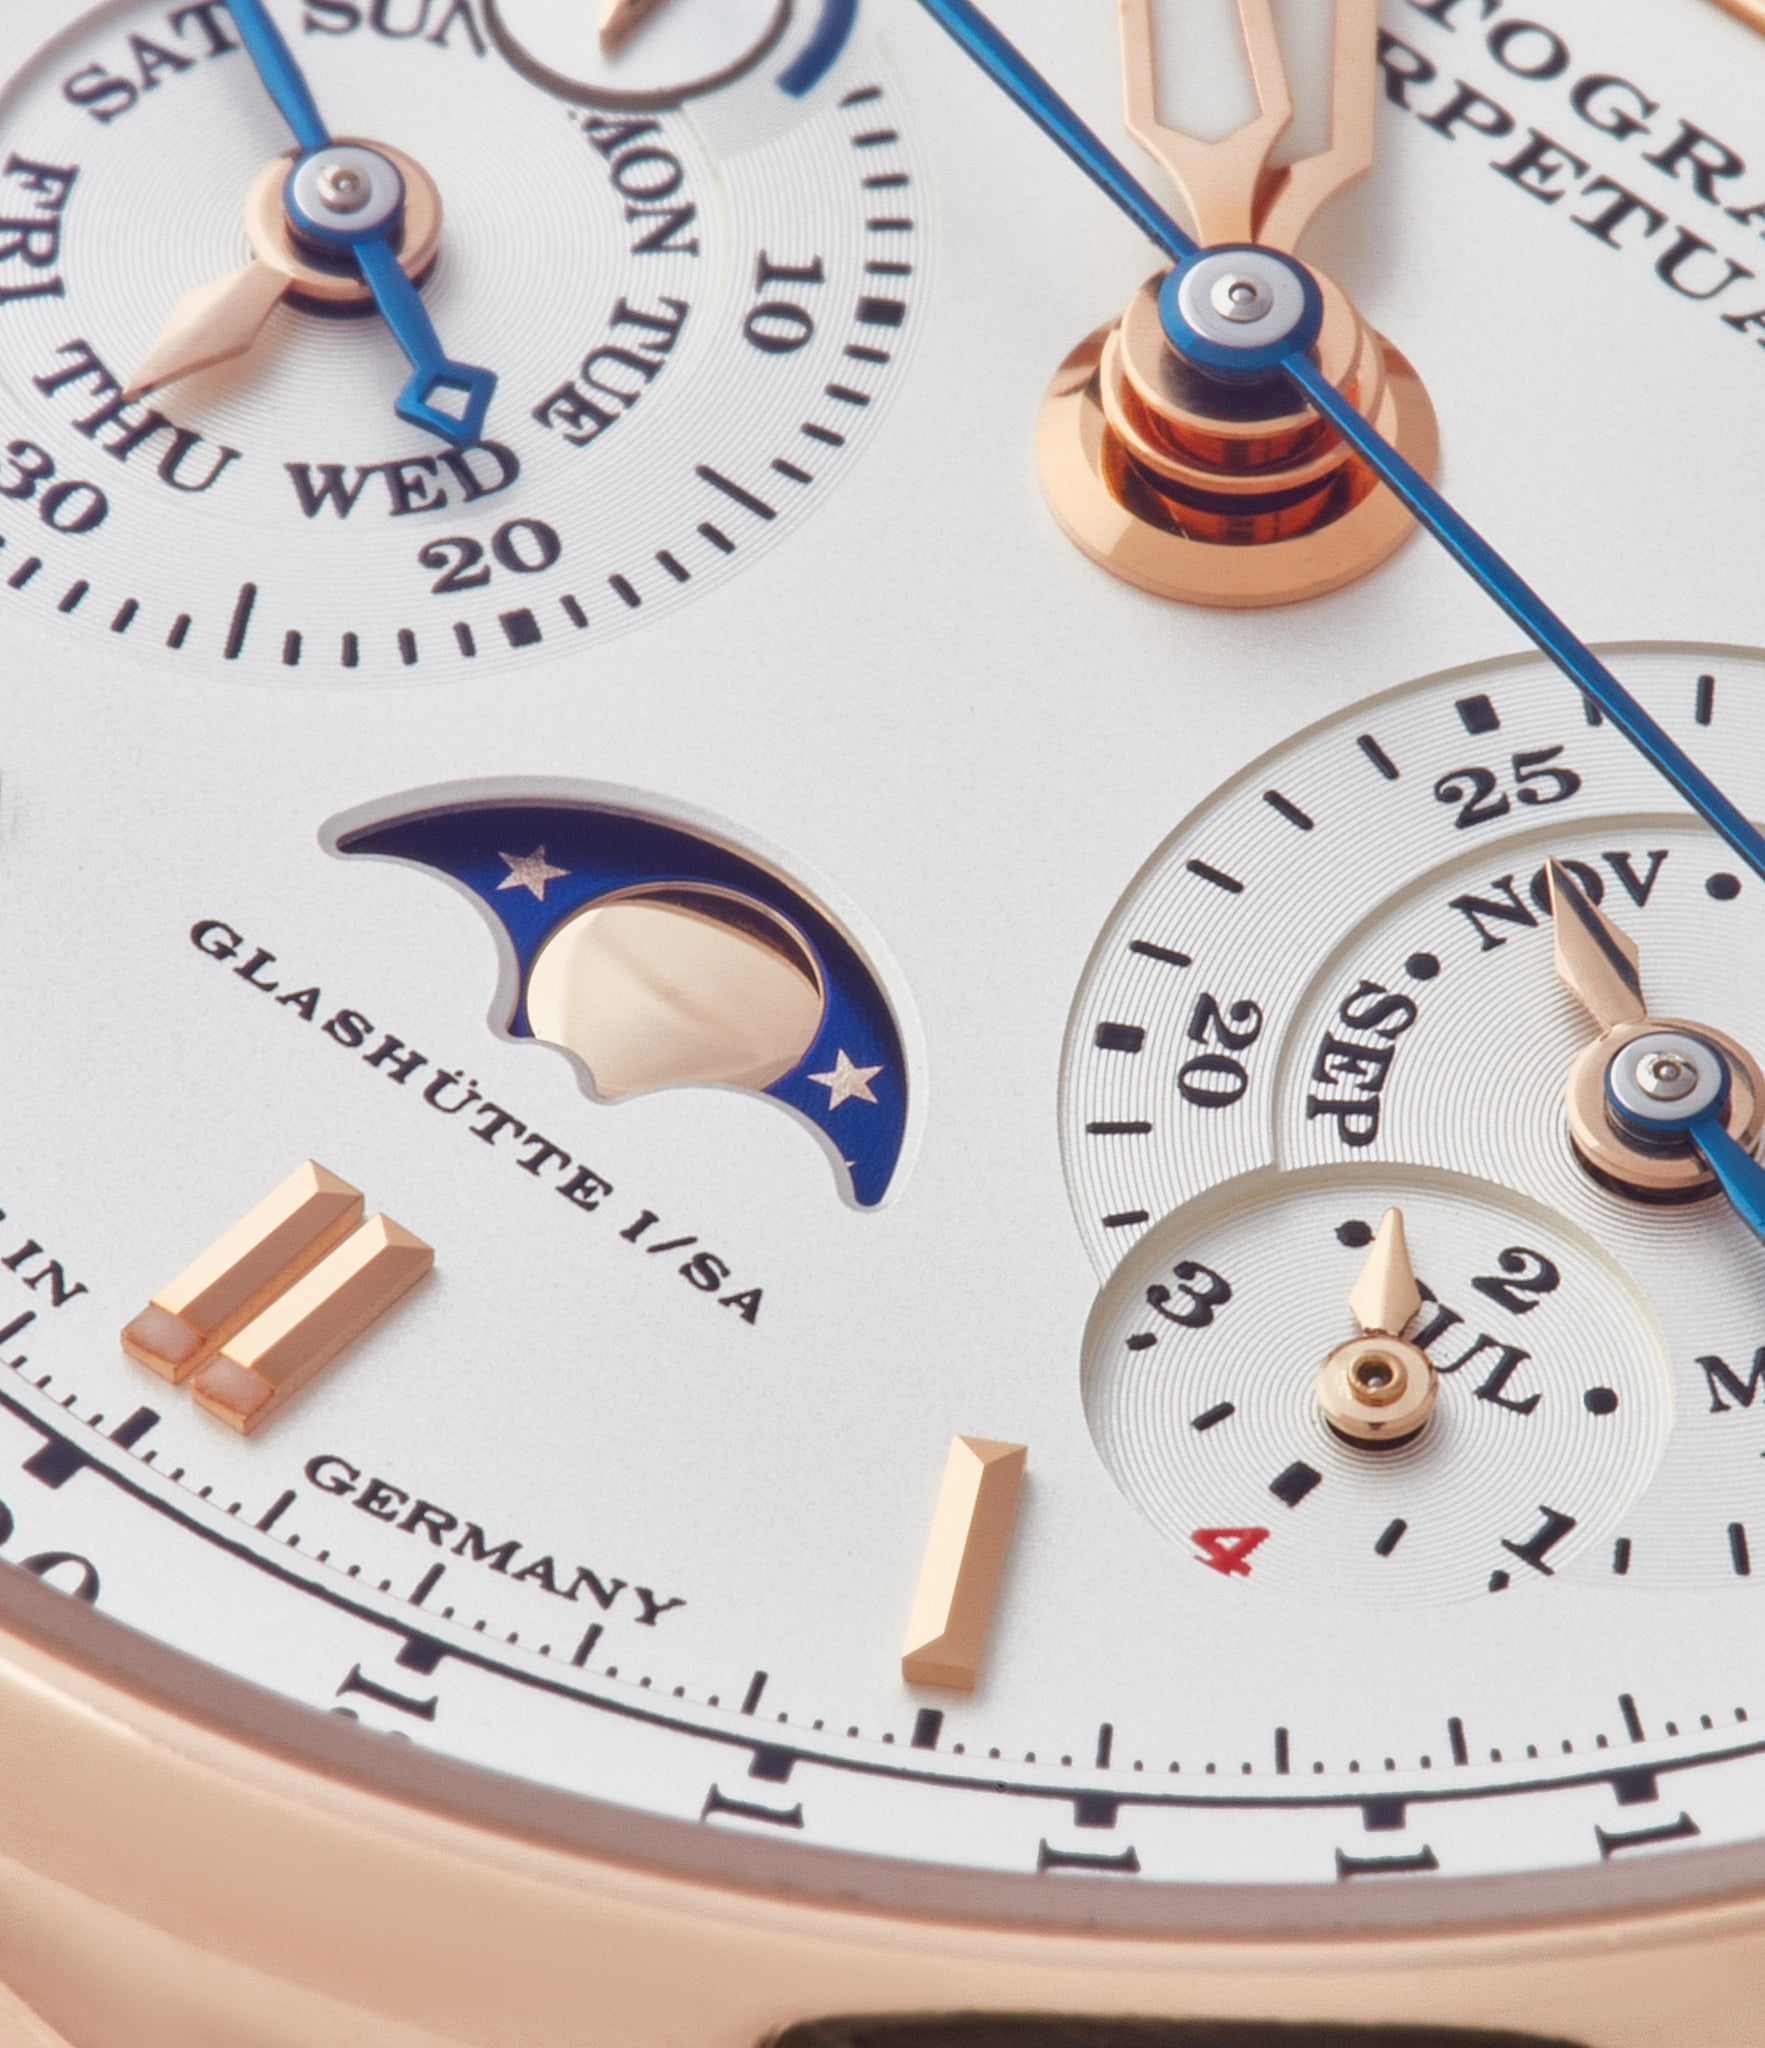 moonphase perpetual calendar A. Lange & Sohne Datograph 410.032 pink gold pre-owned dress watch for sale online at A Collected Man London seller rare watches